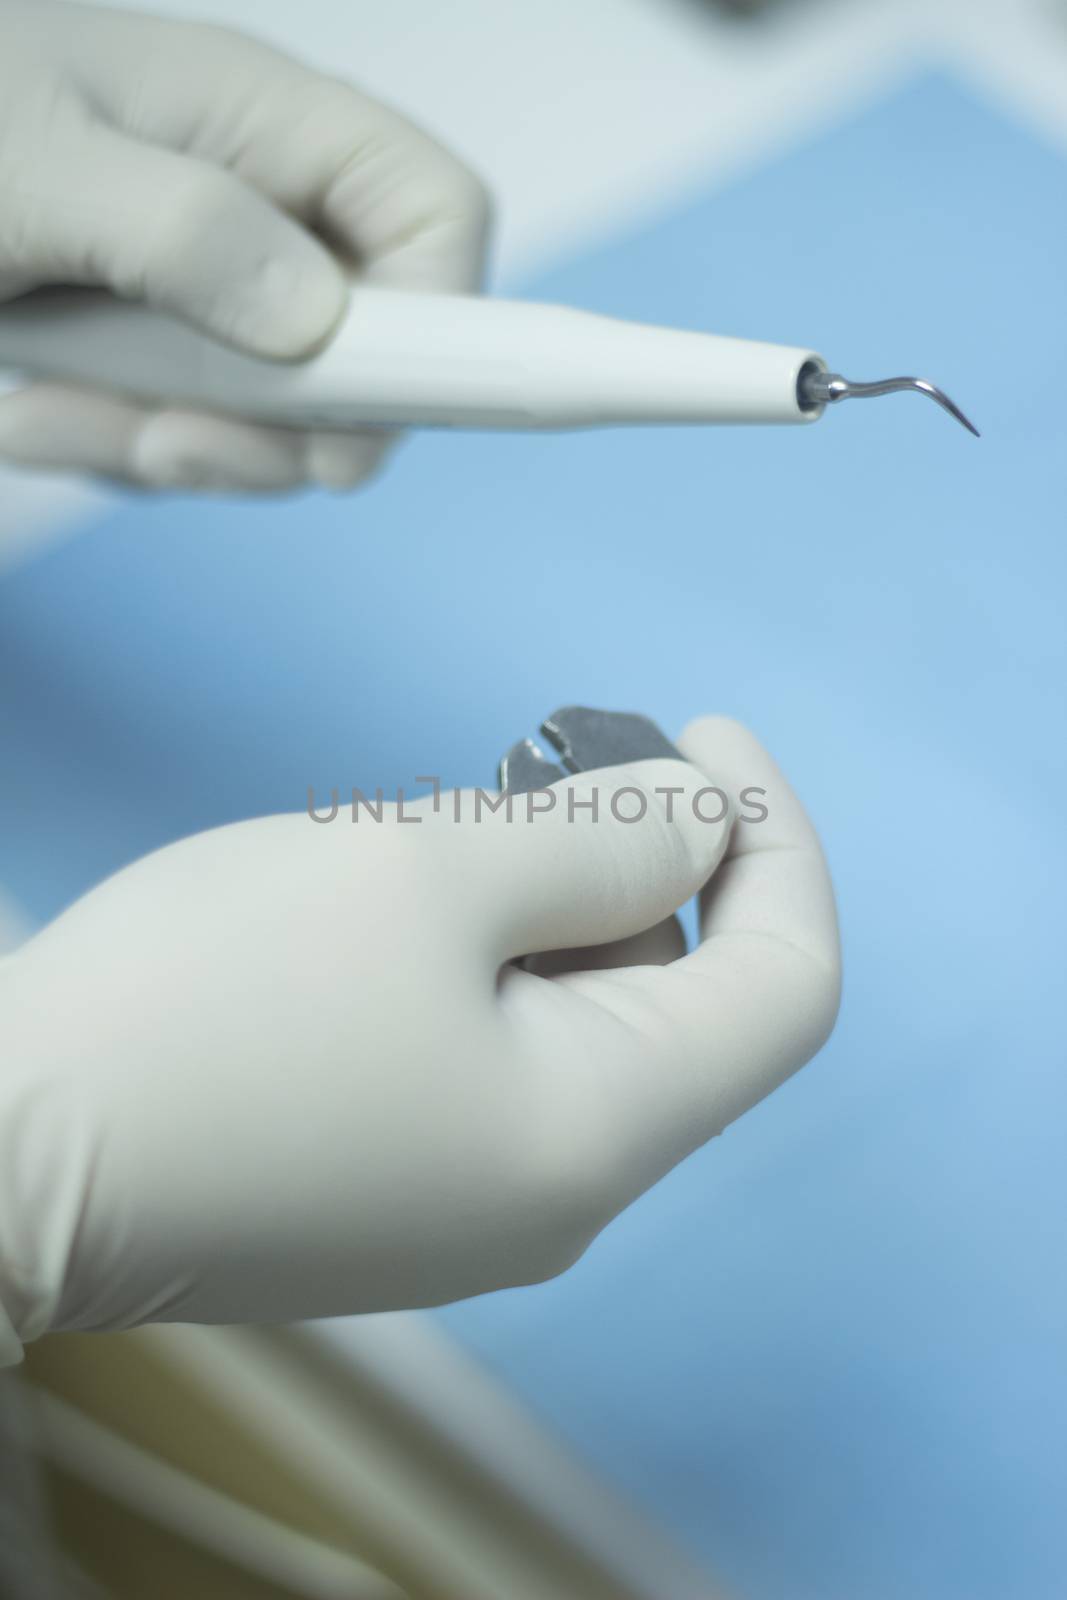 Hands of dental nurse in dental surgery clinic in white surgical sterile gloves attaching ultrasound teeth cleaning attachment prior to patient tooth clean treatment session by the dentist. Close-up photo with shallow depth of focus. 